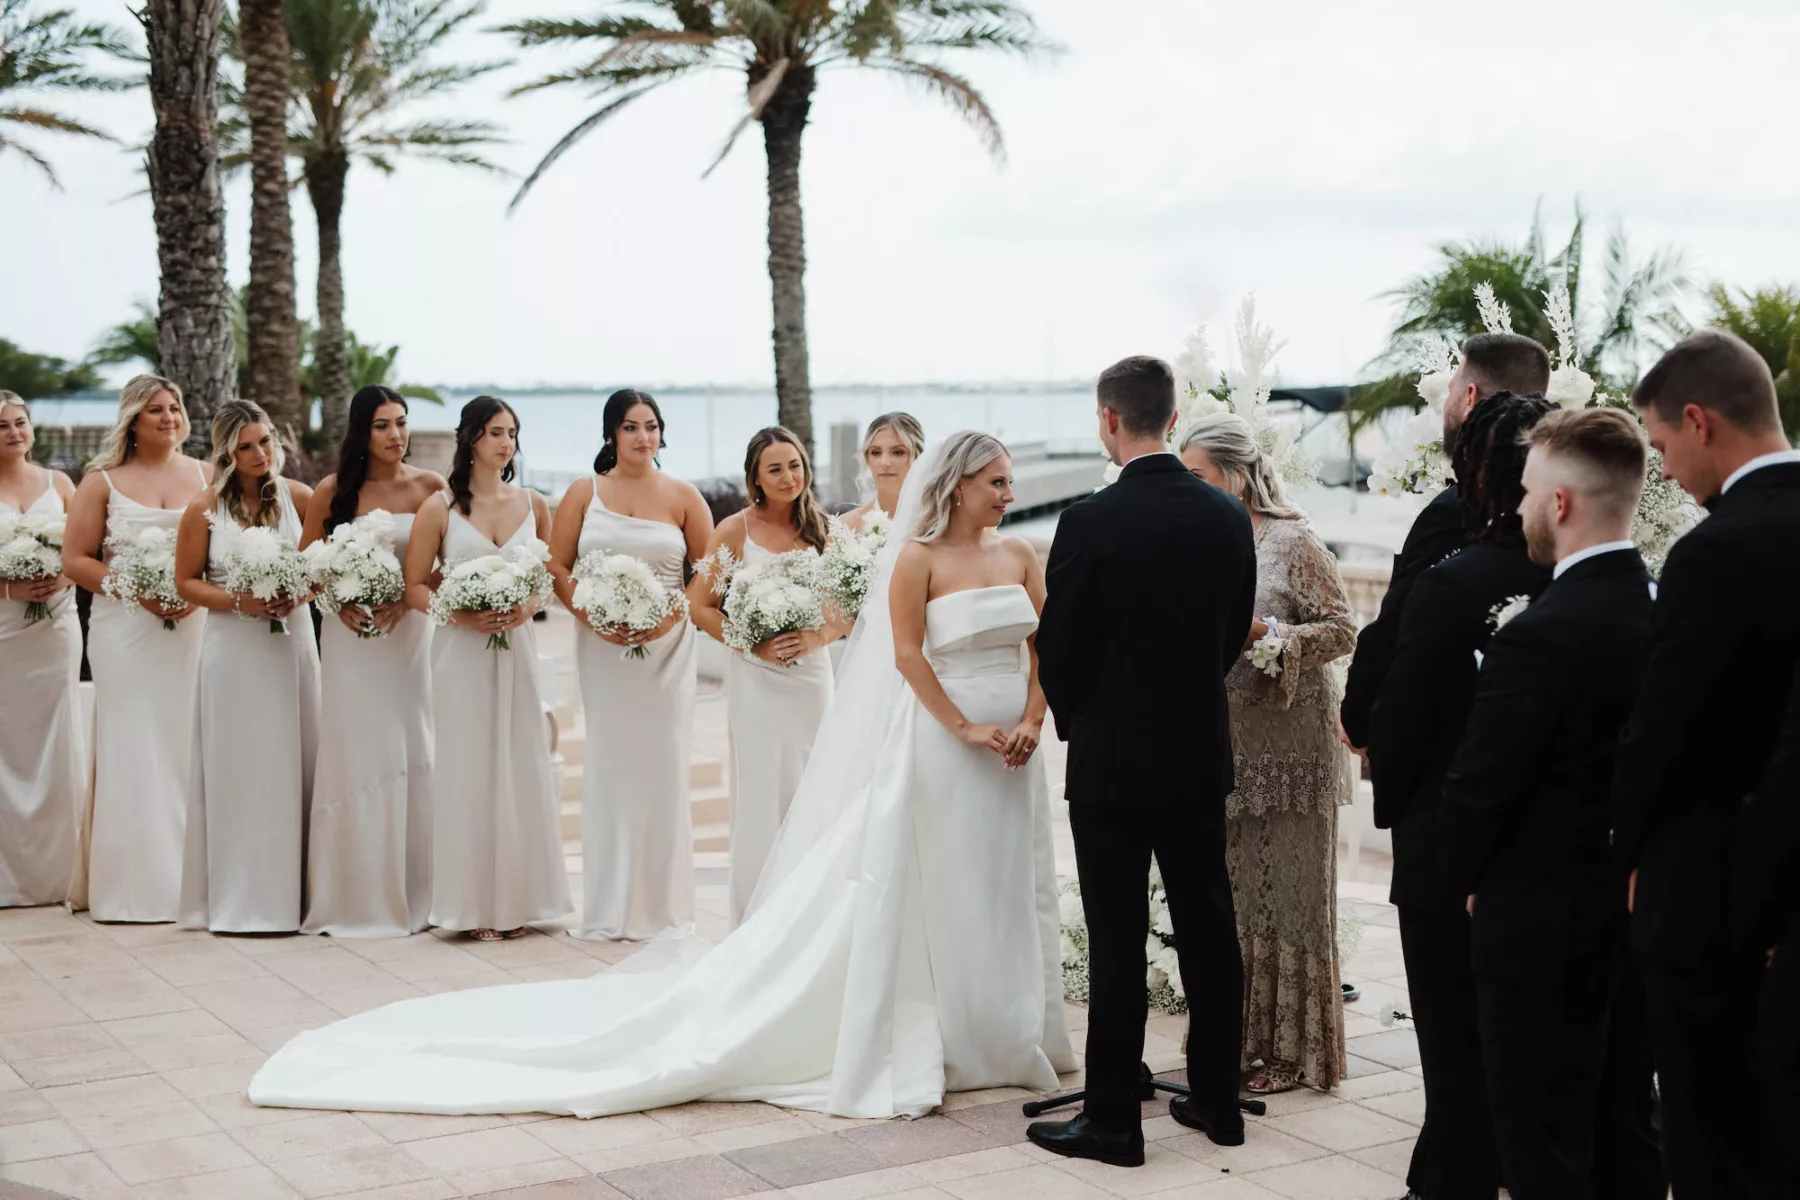 Bride and Groom Vow Exchange Wedding Portrait | Timeless Monochromatic Outdoor Oceanview Wedding Ceremony Ideas | Tampa Bay Event Venue Westshore Yacht Club